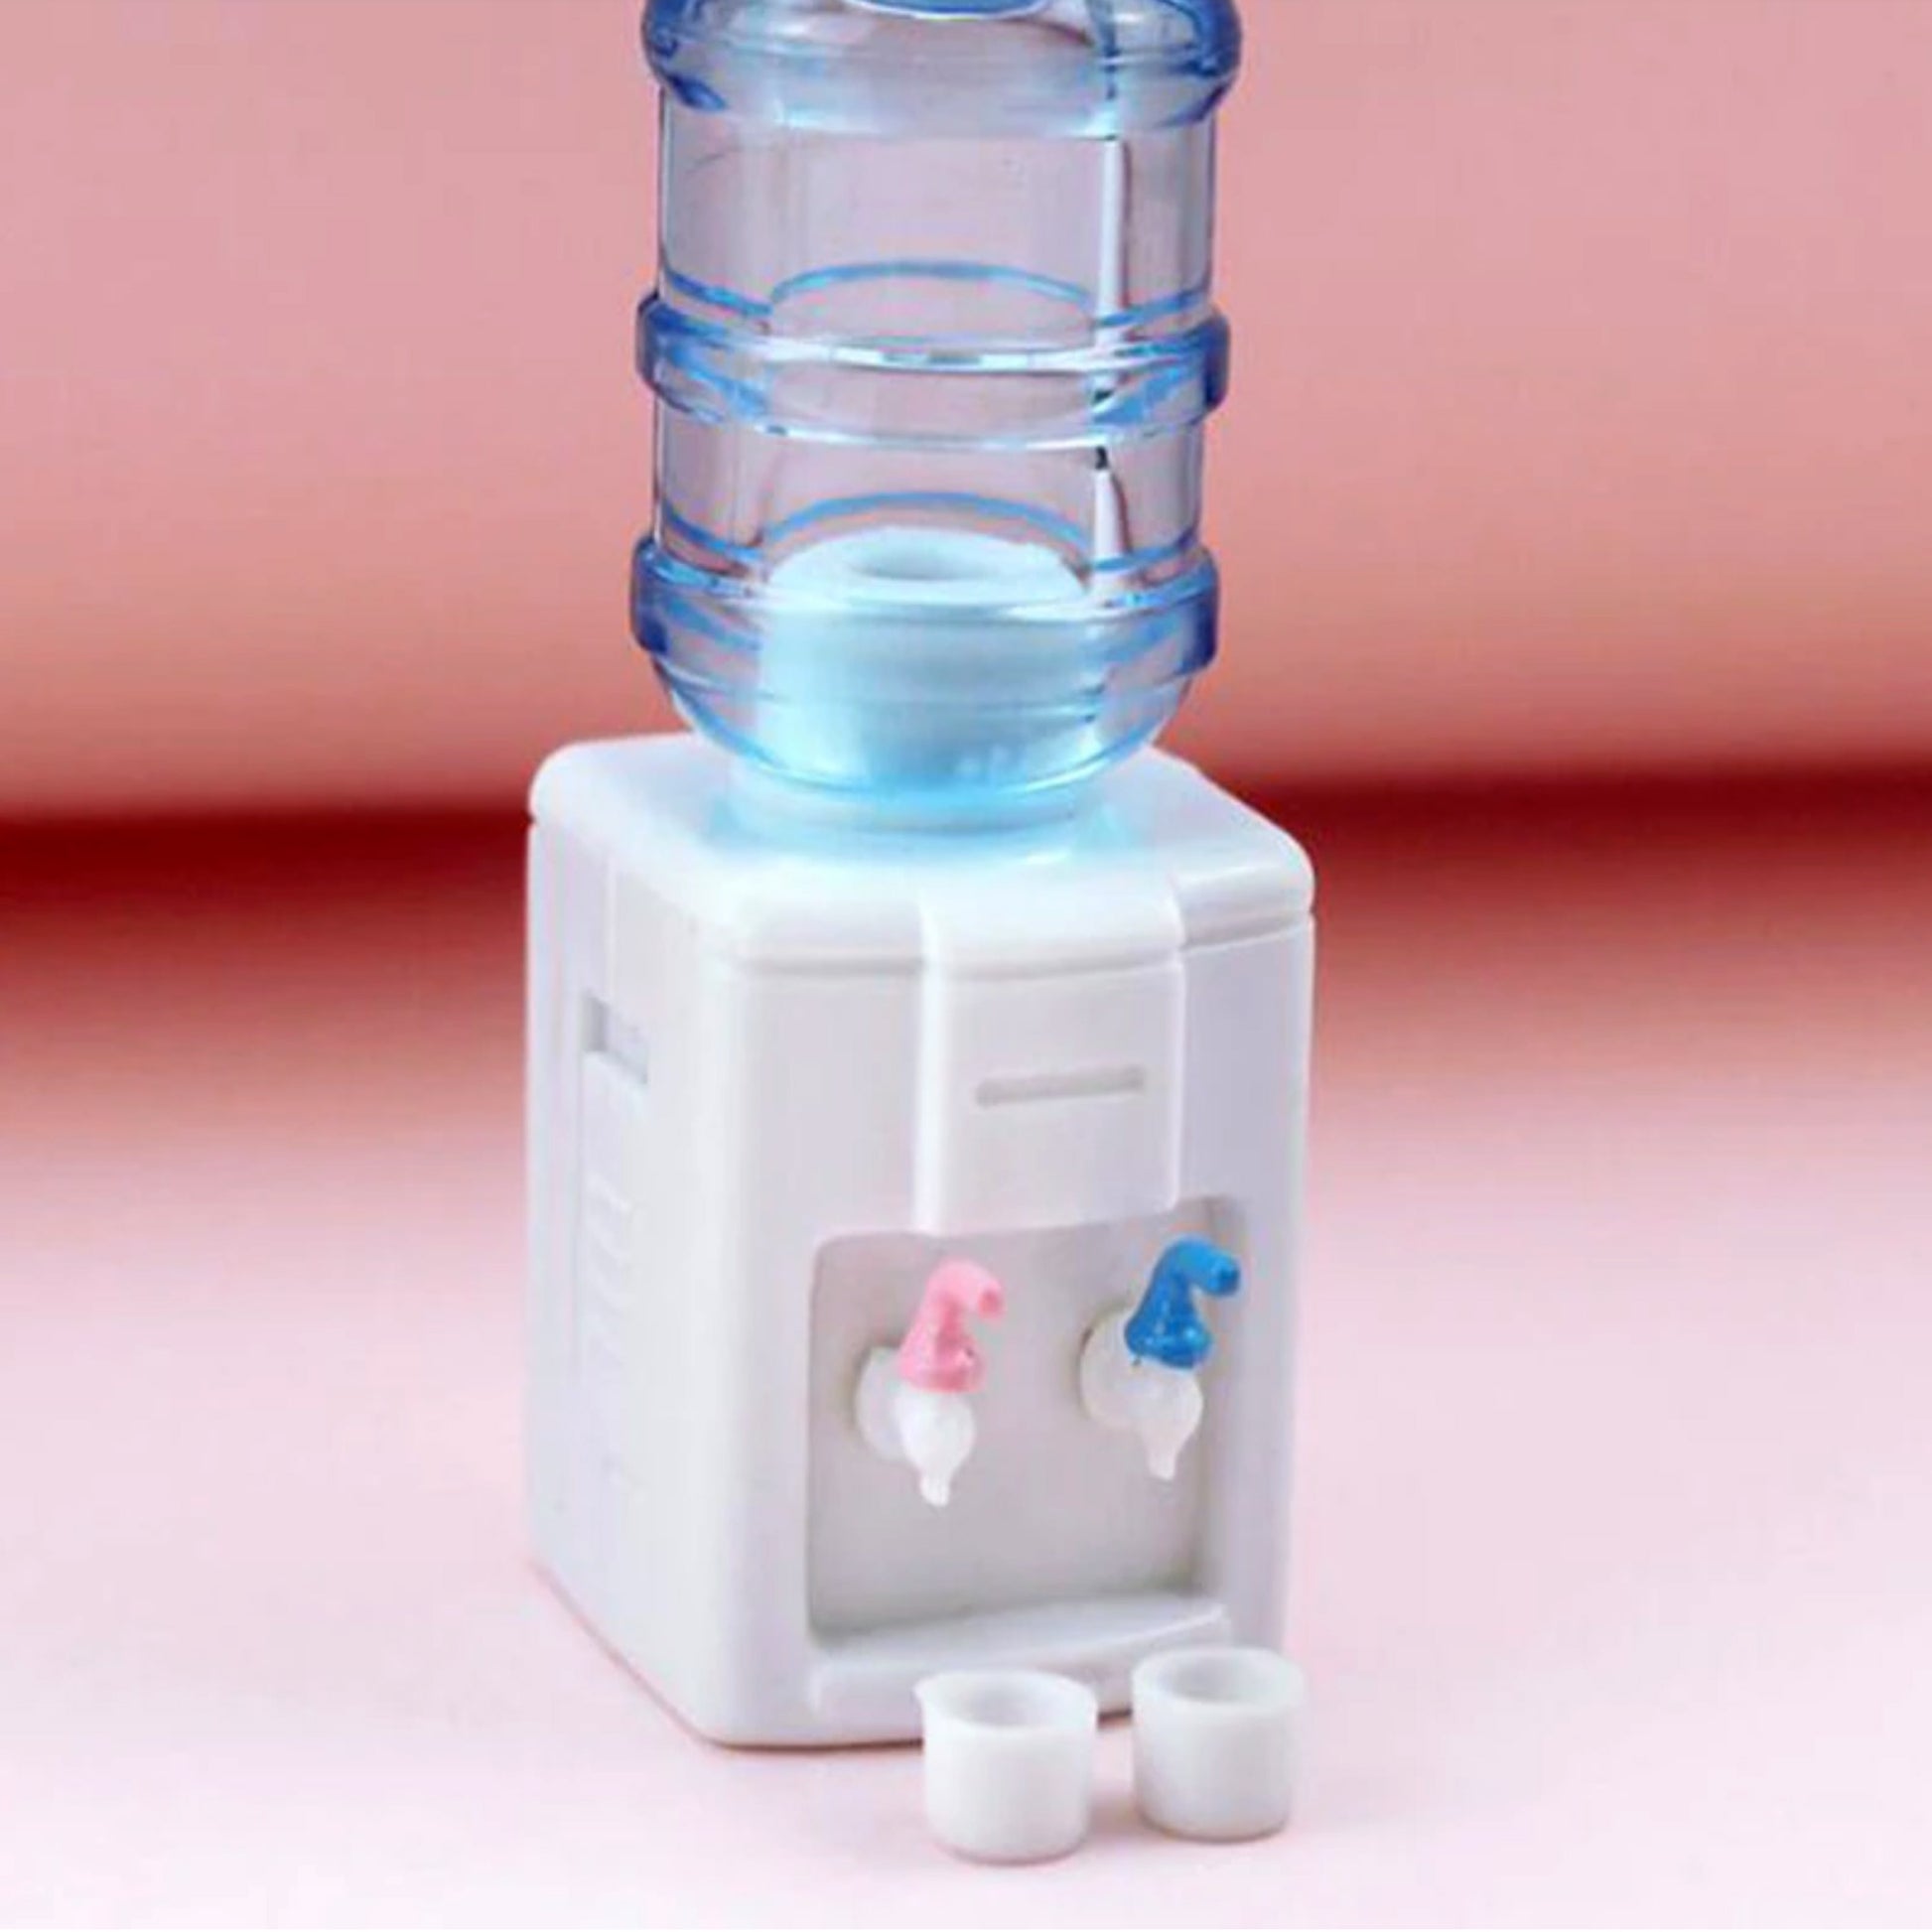 miniature dollhouse water cooler with cups